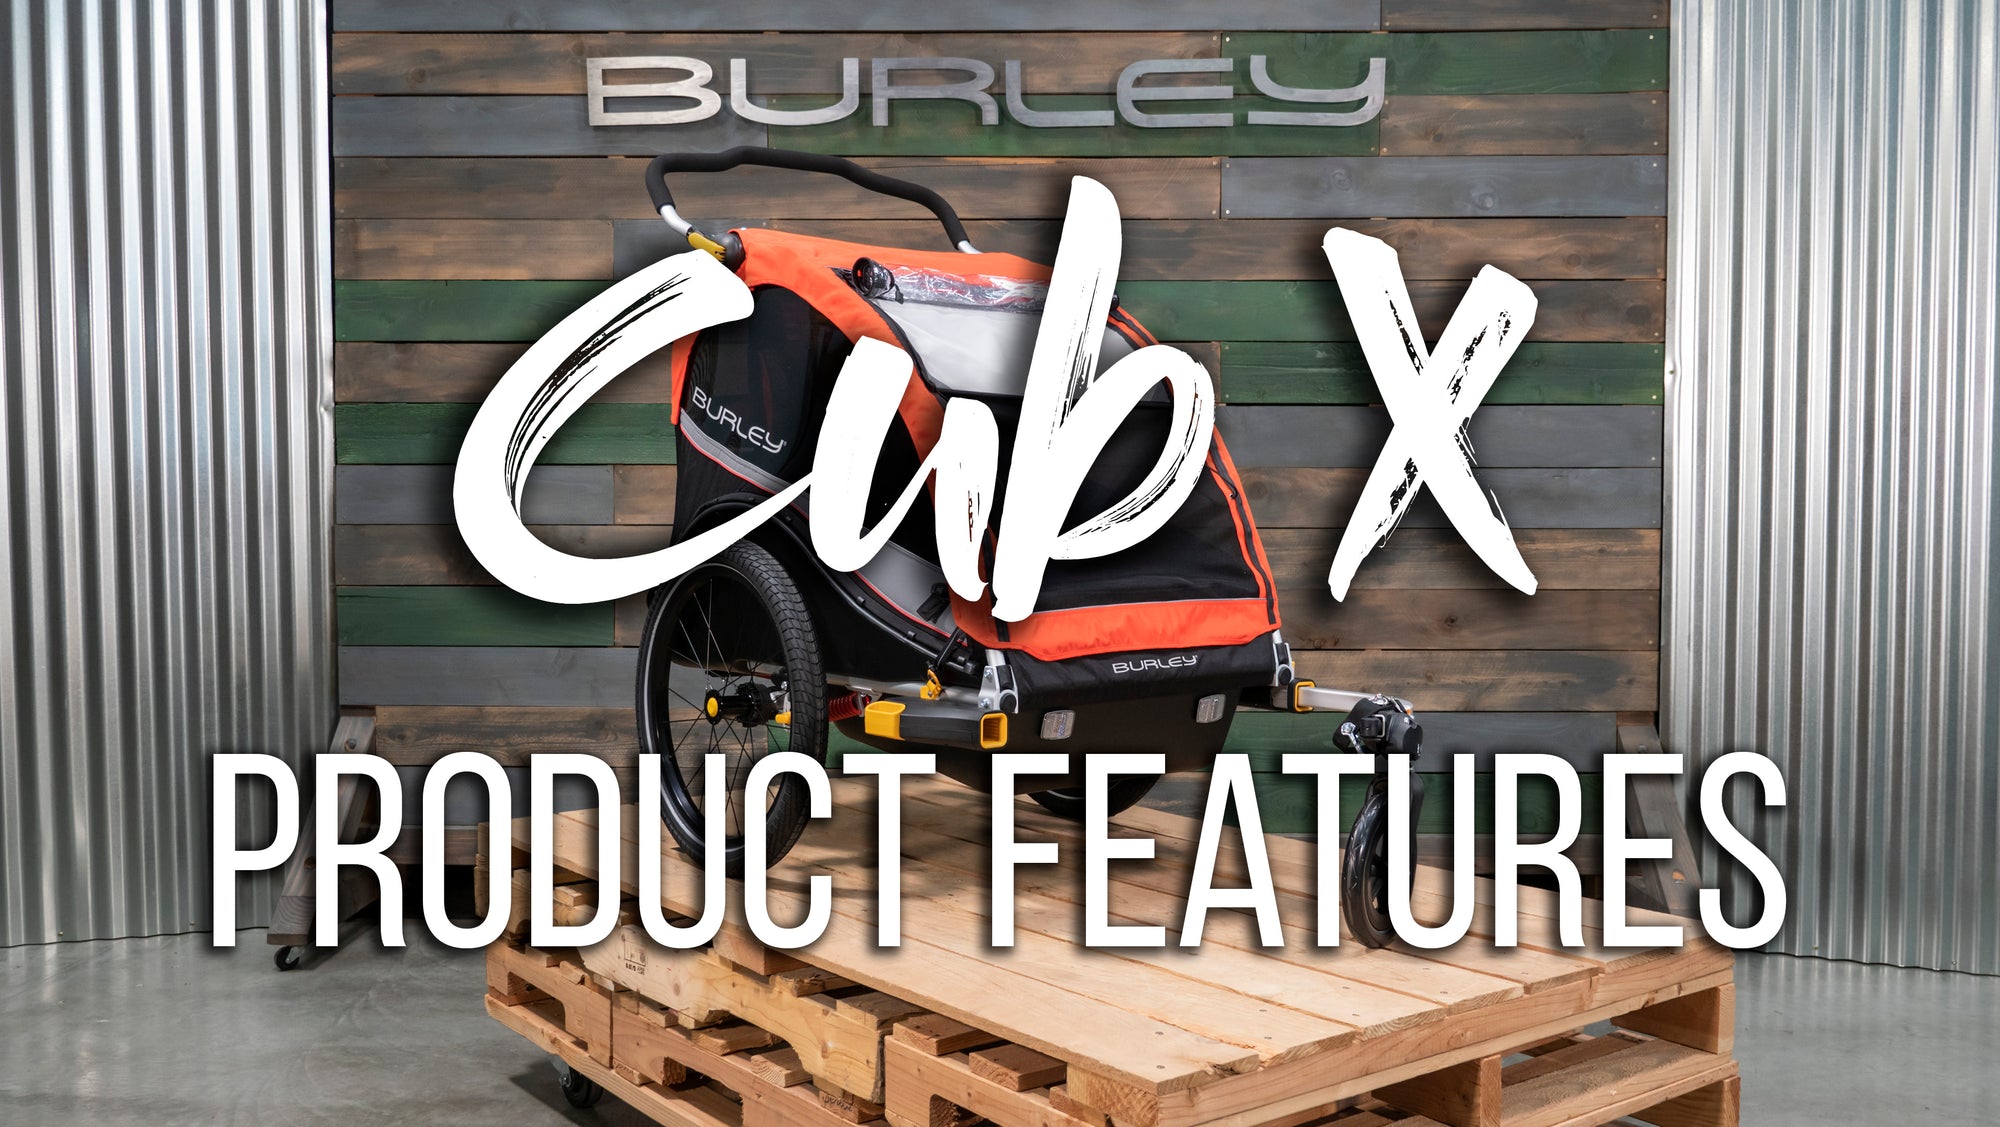 Cub X Product Features